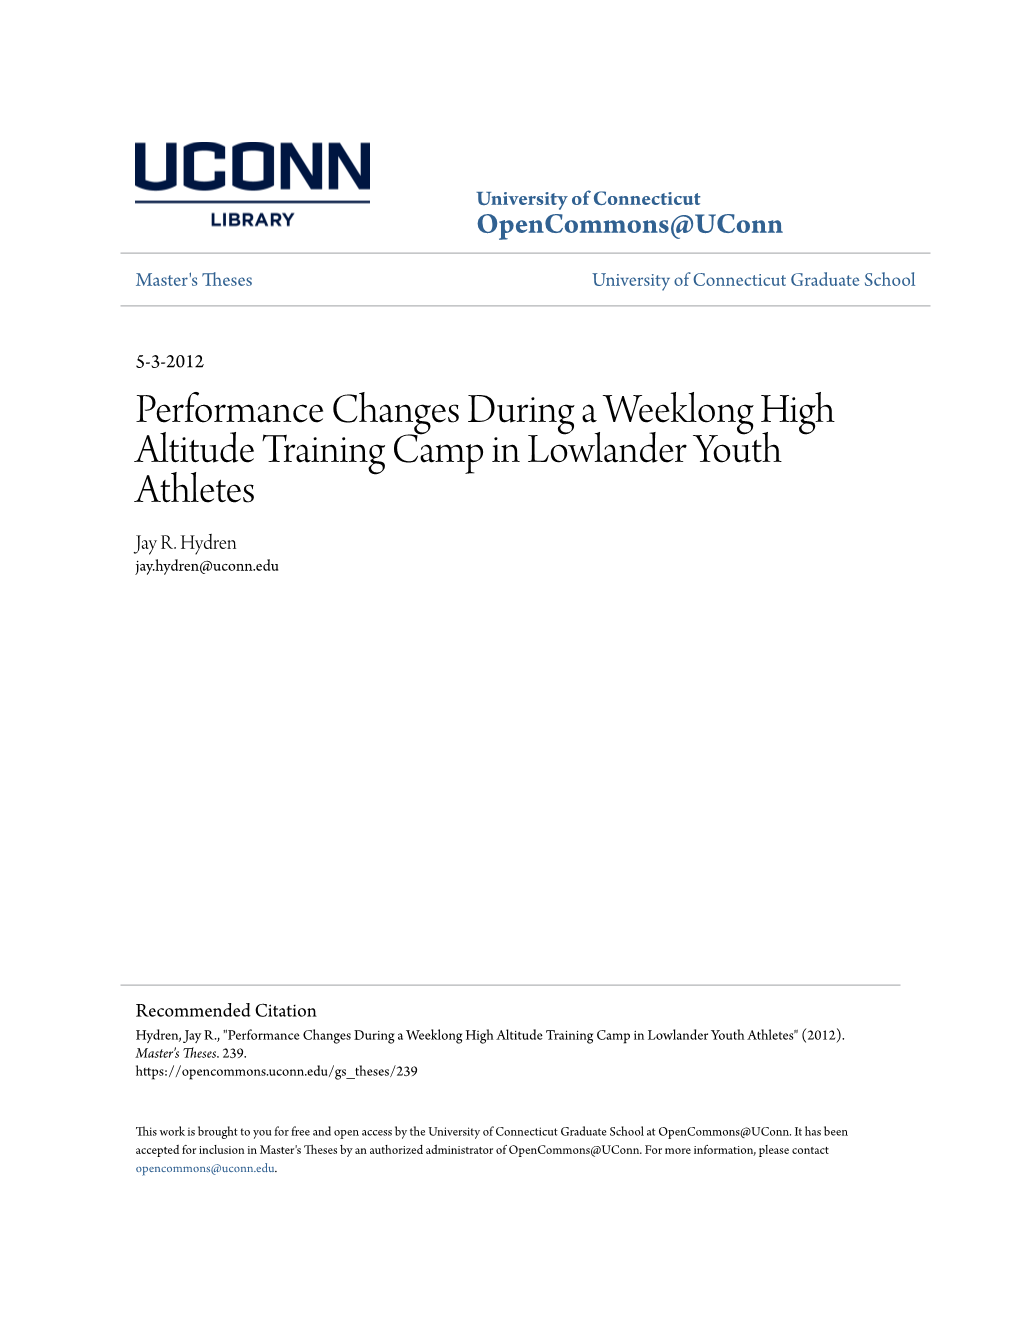 Performance Changes During a Weeklong High Altitude Training Camp in Lowlander Youth Athletes Jay R